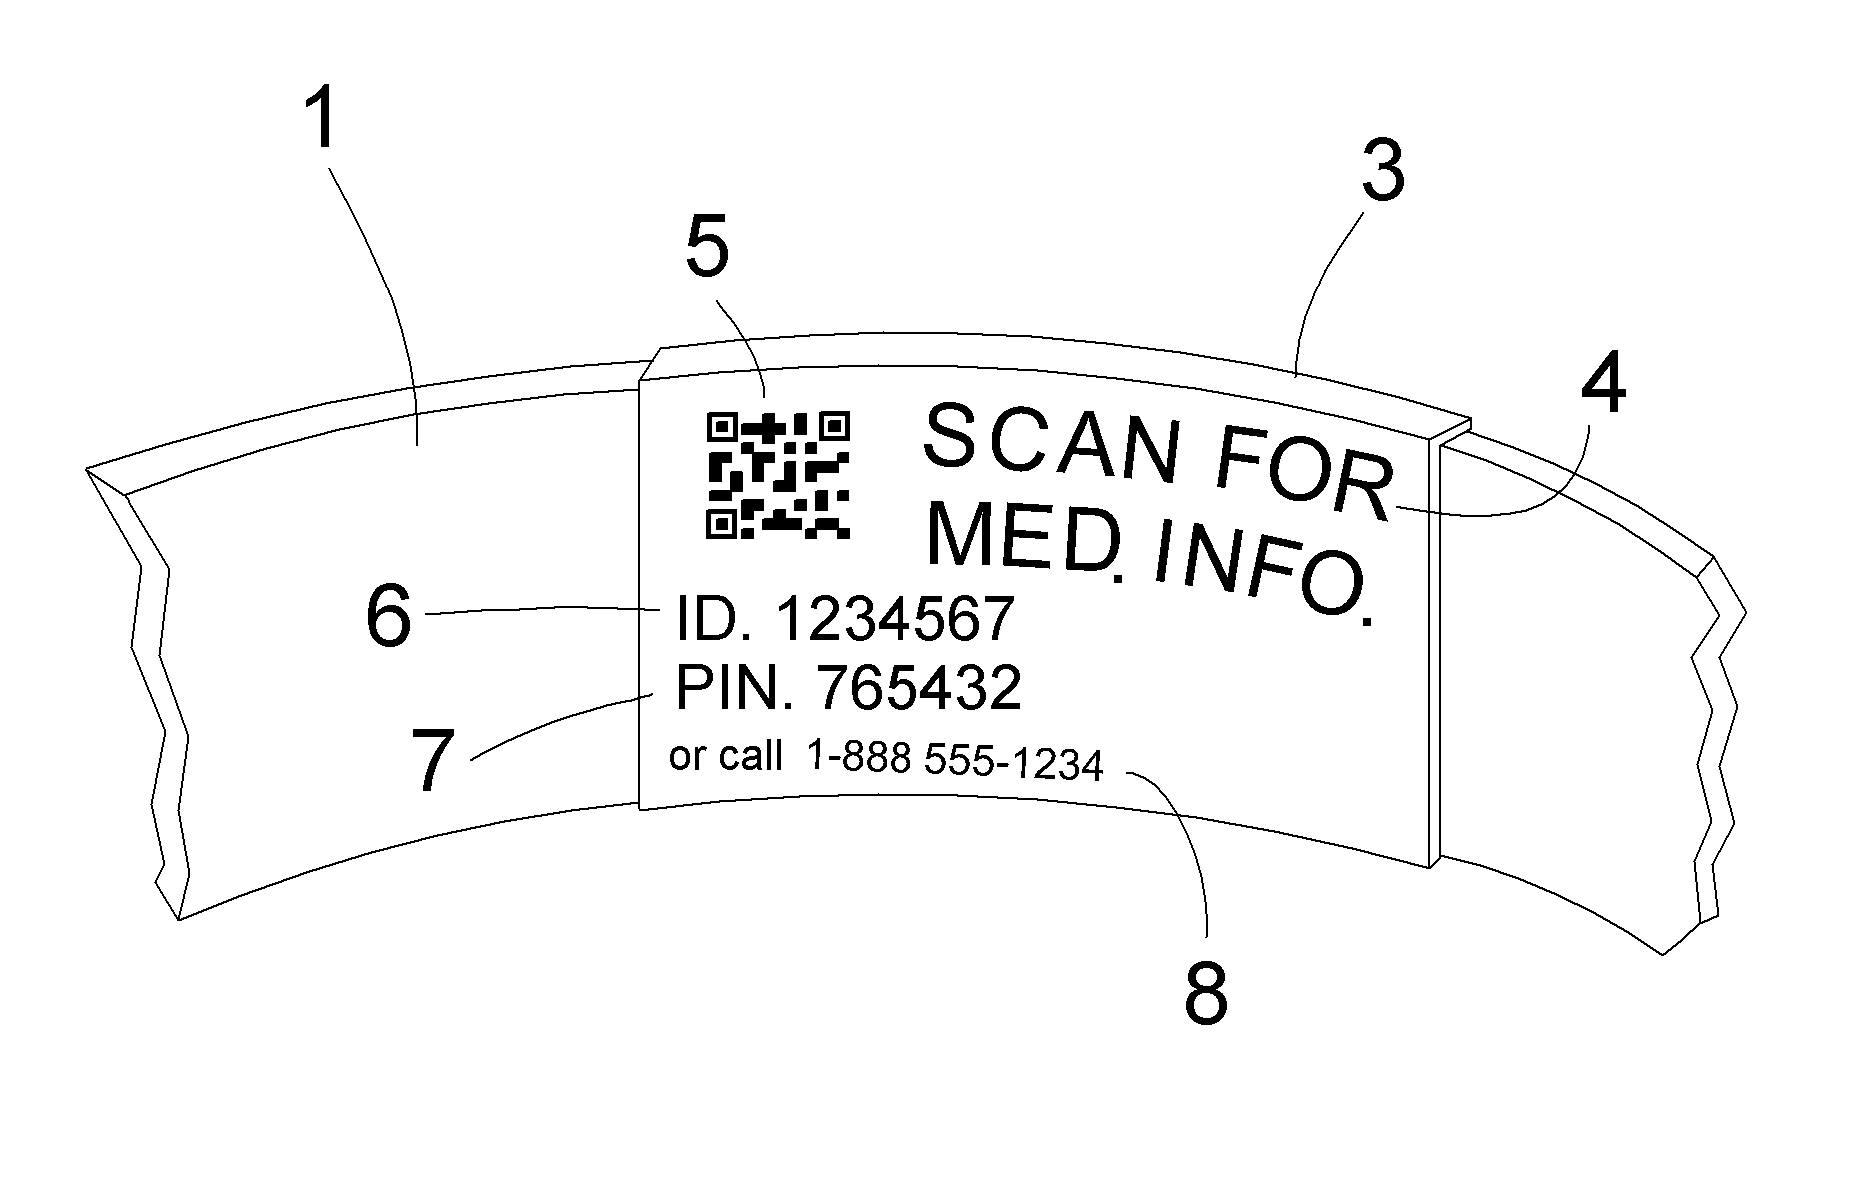 System and method for quickly obtaining medical information